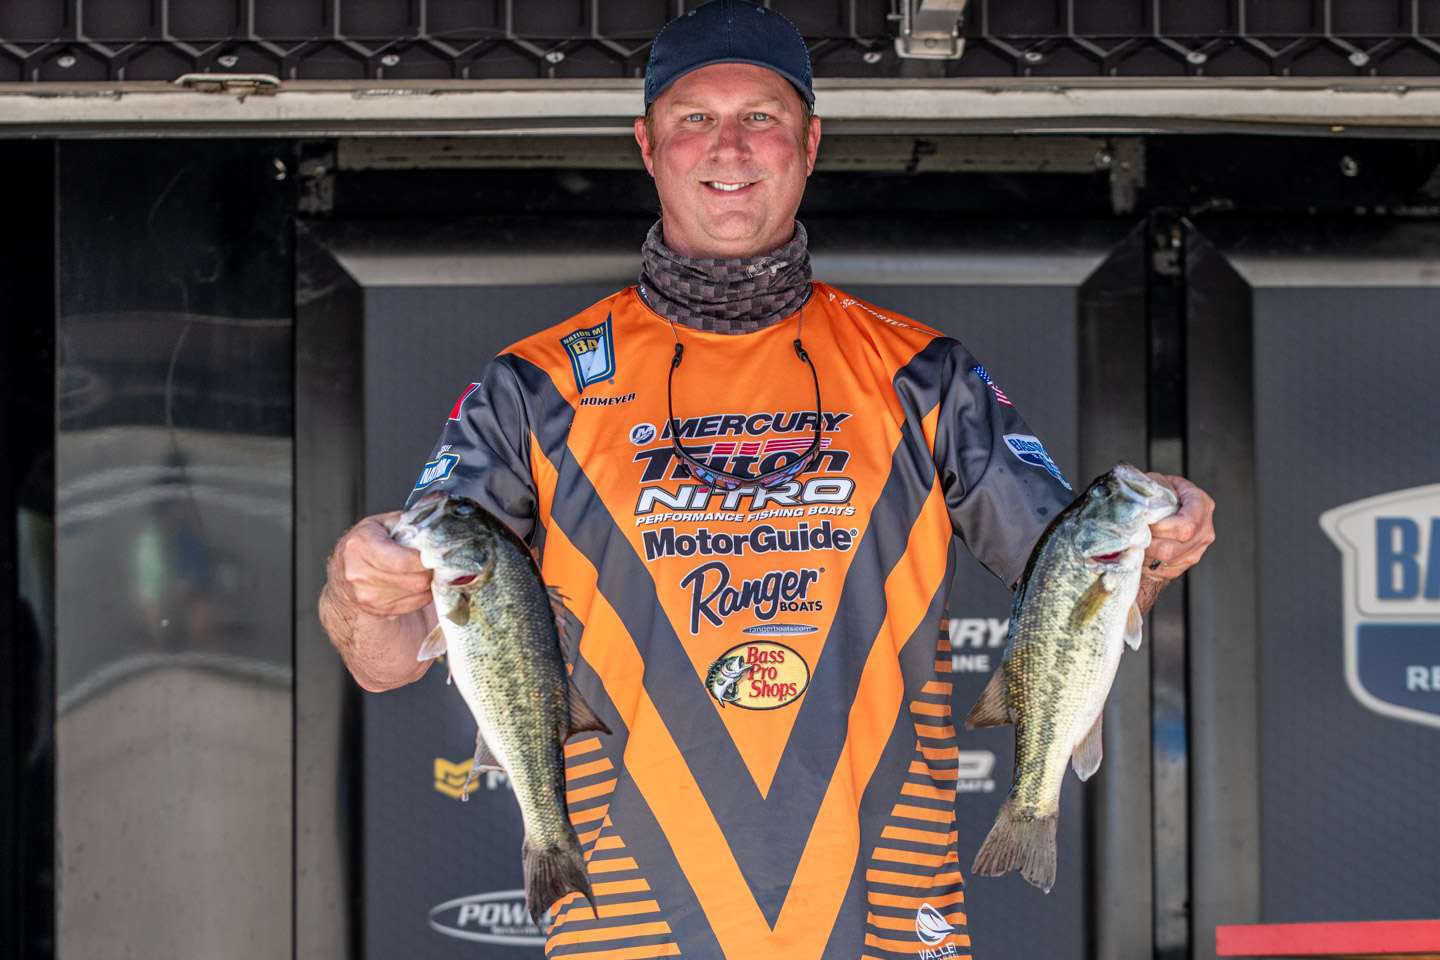 Jeremy Homeyer, Tennessee (47th, 8 - 10)